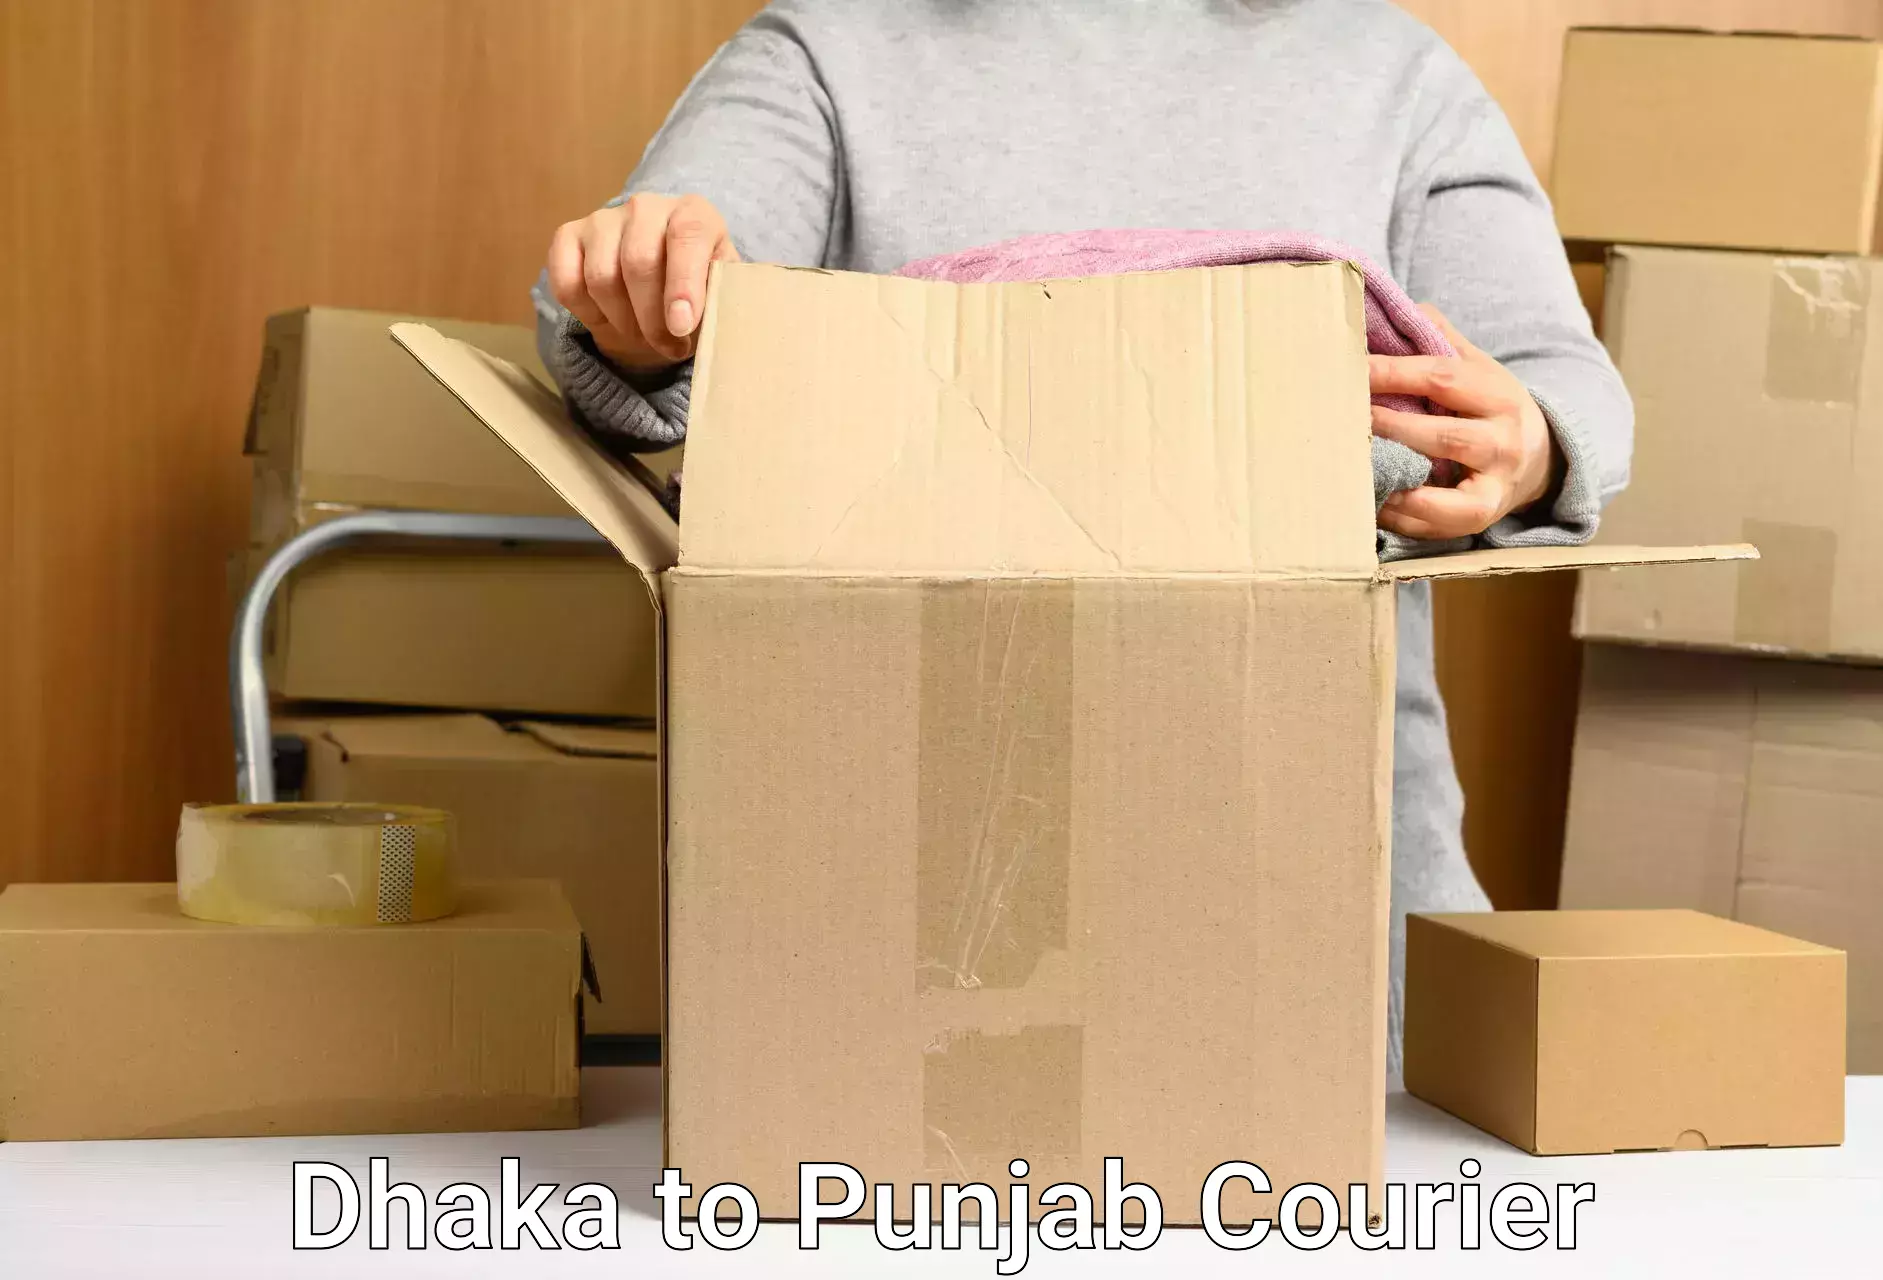 Flexible delivery scheduling Dhaka to Punjab